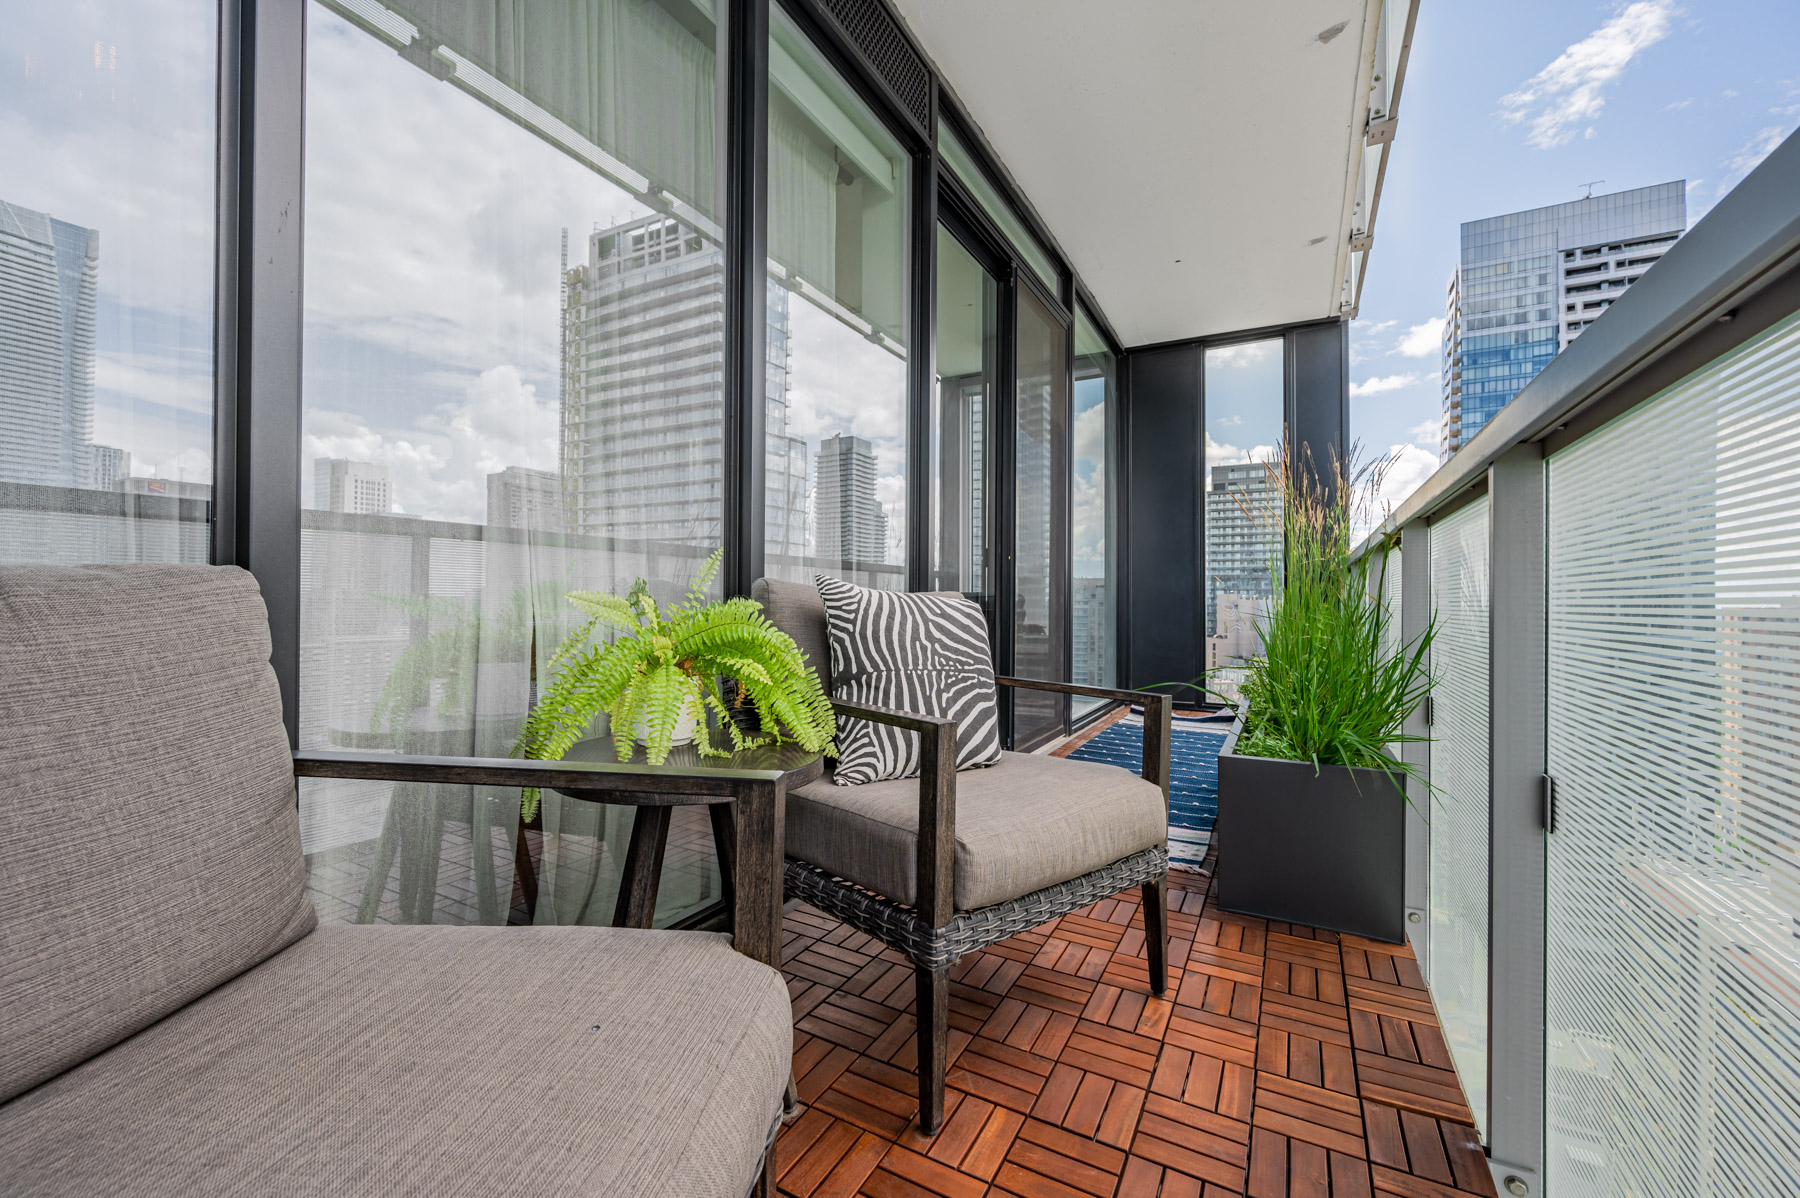 28 Wellesley St Unit 3009 balcony with parquet floors and furniture.